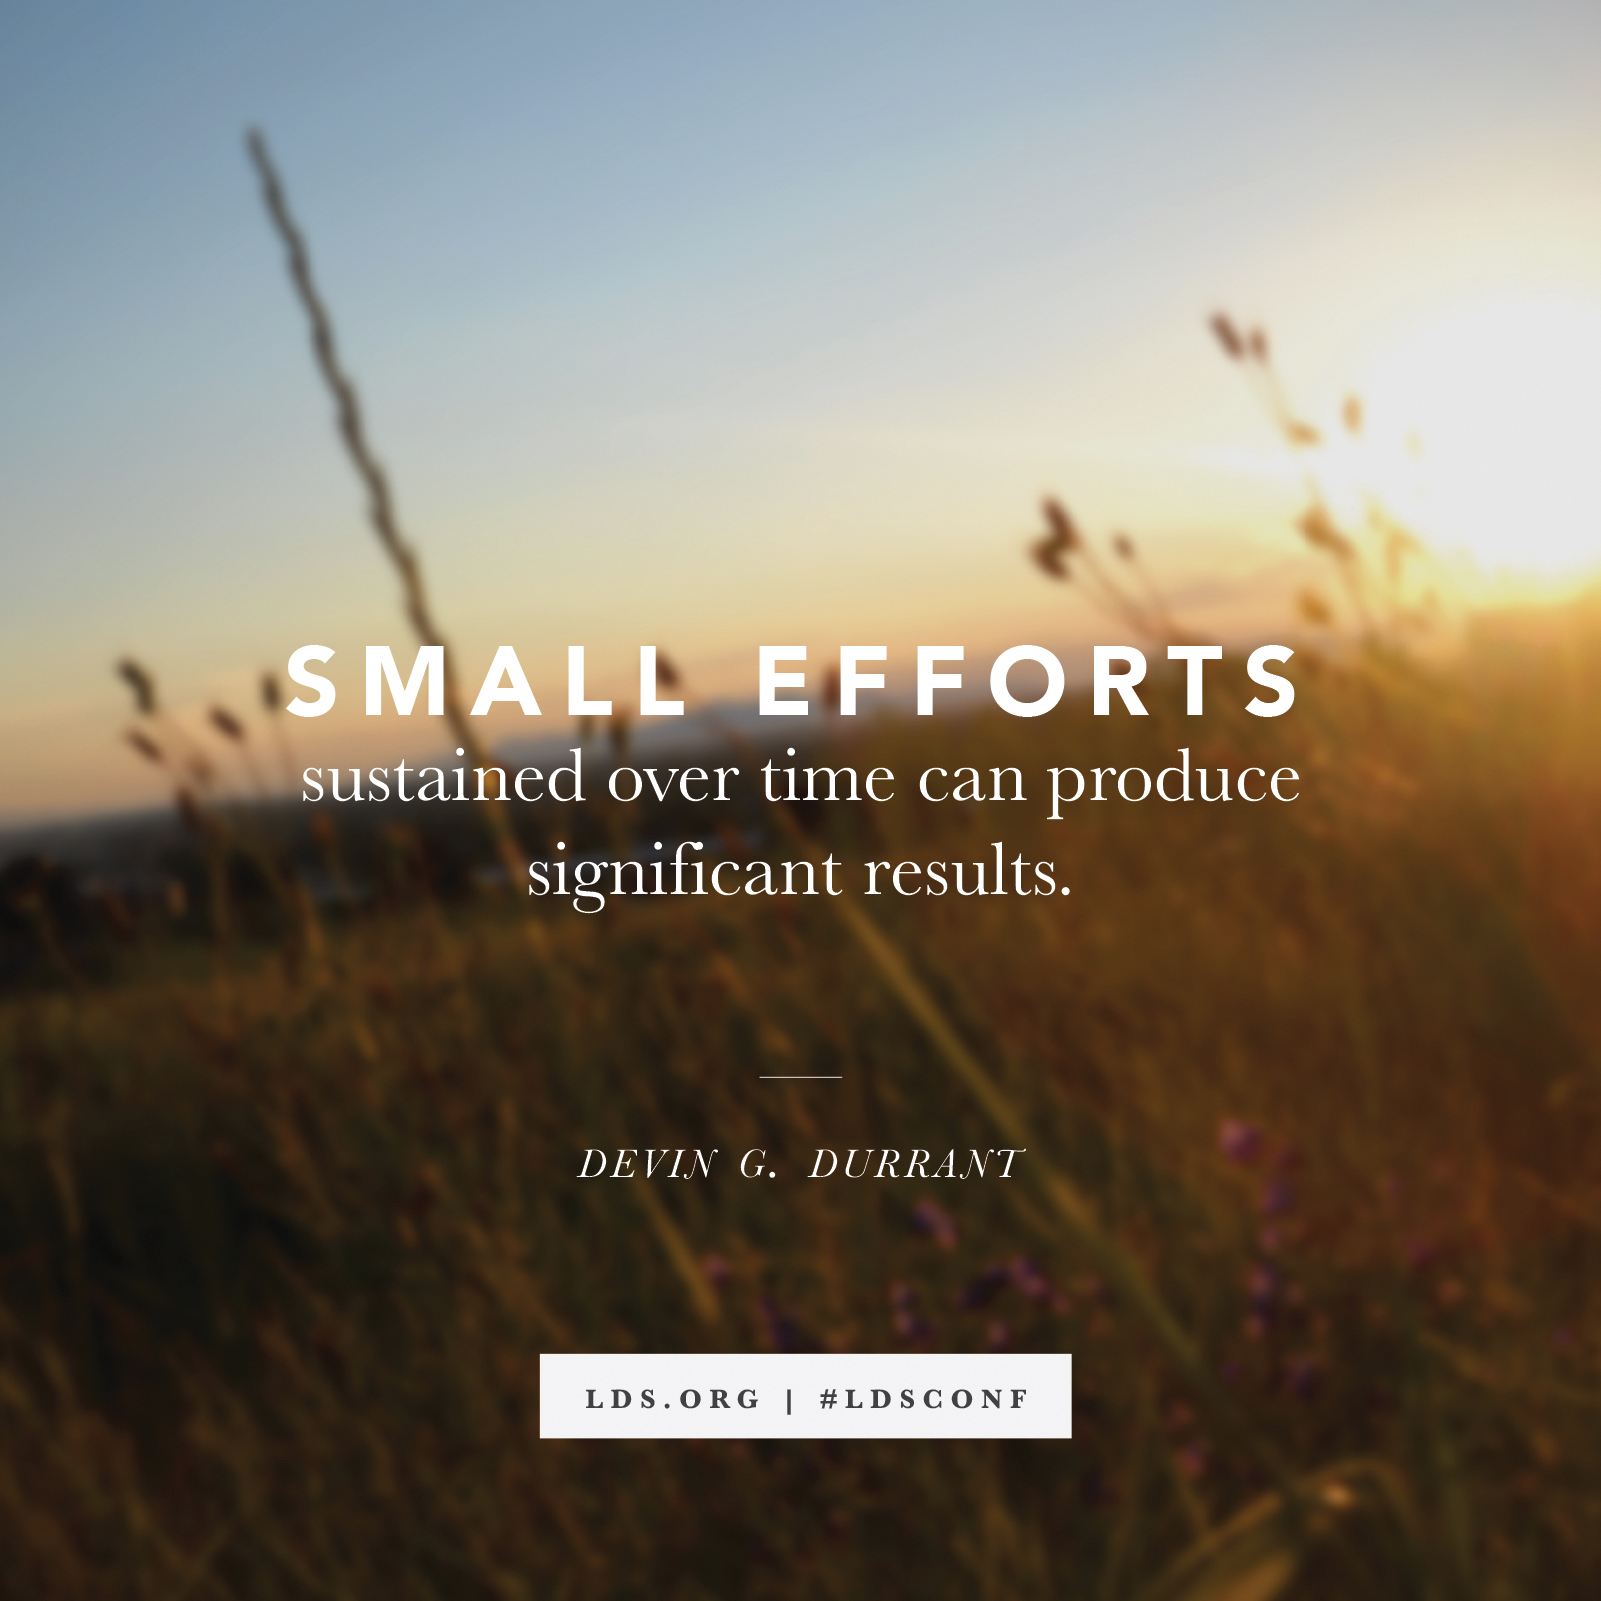 A background of plants growing in a field at sunset, paired with a quote from Devin G. Durrant: “Small efforts … produce significant results.”